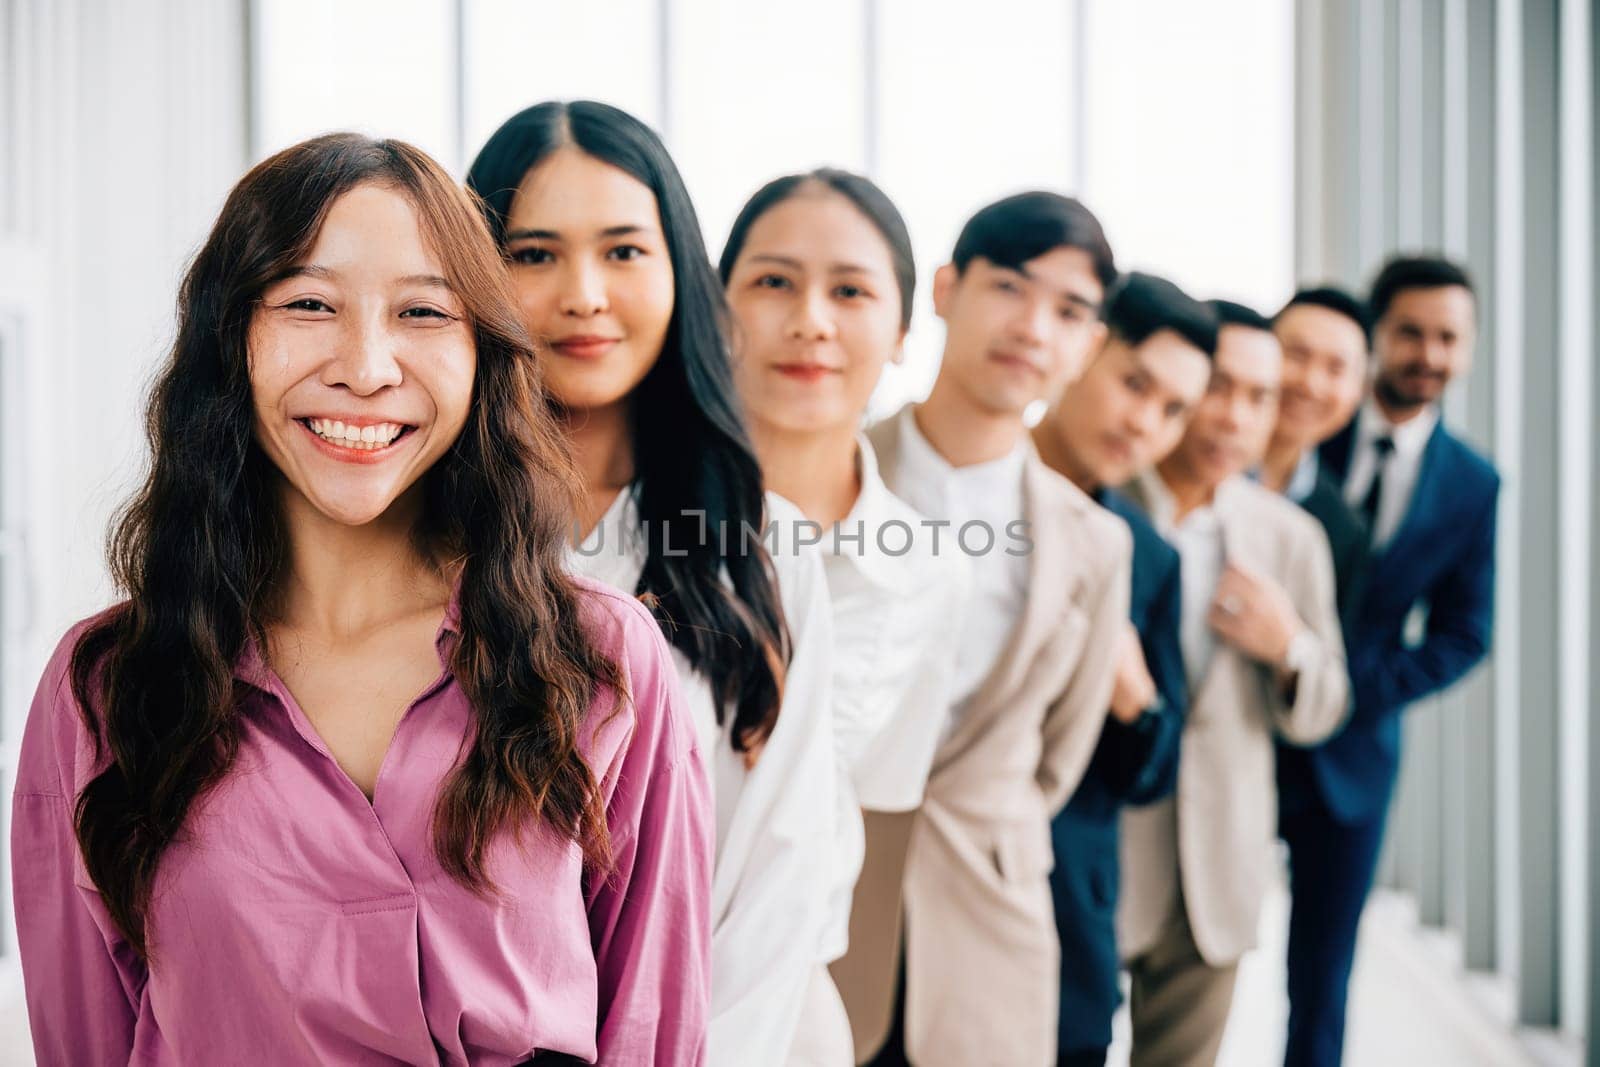 Confident and successful young businesspeople gather indoors, their crossed arms symbolizing unity and achievement. This is a diverse team of professionals who excel in teamwork.